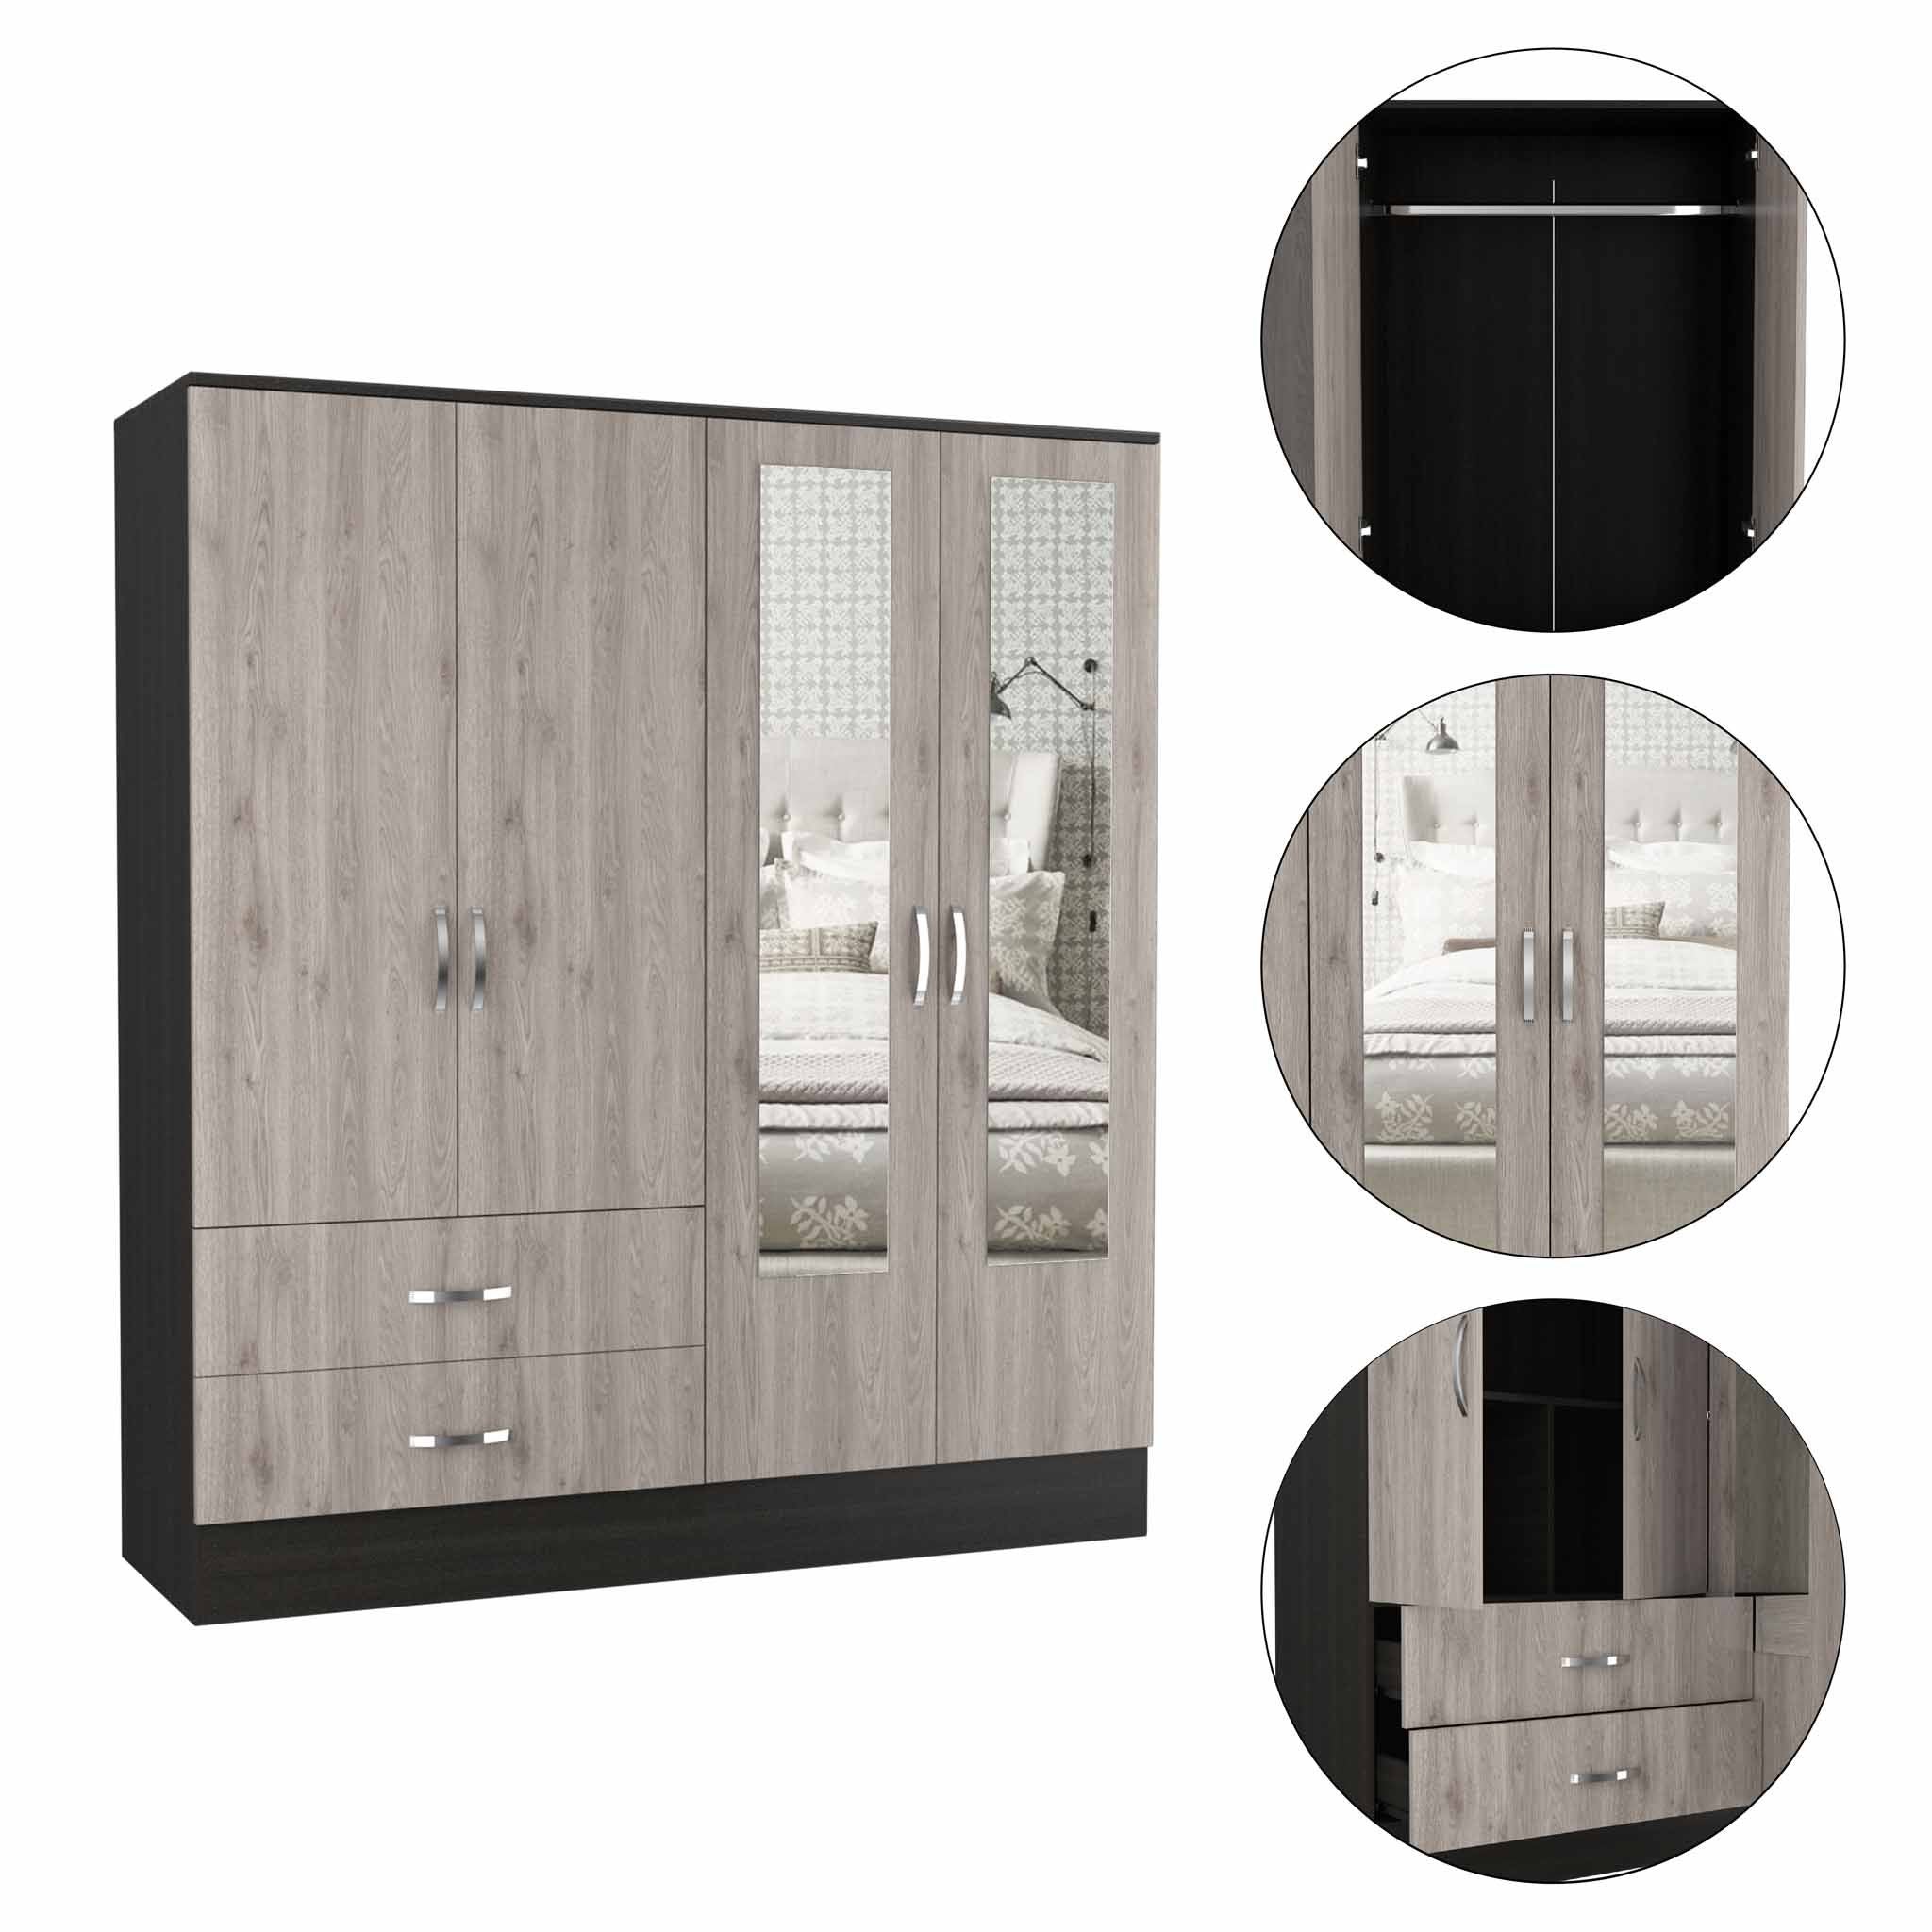 Light Oak and Black Four Door Wardrobe Closet with Mirrors Default Title